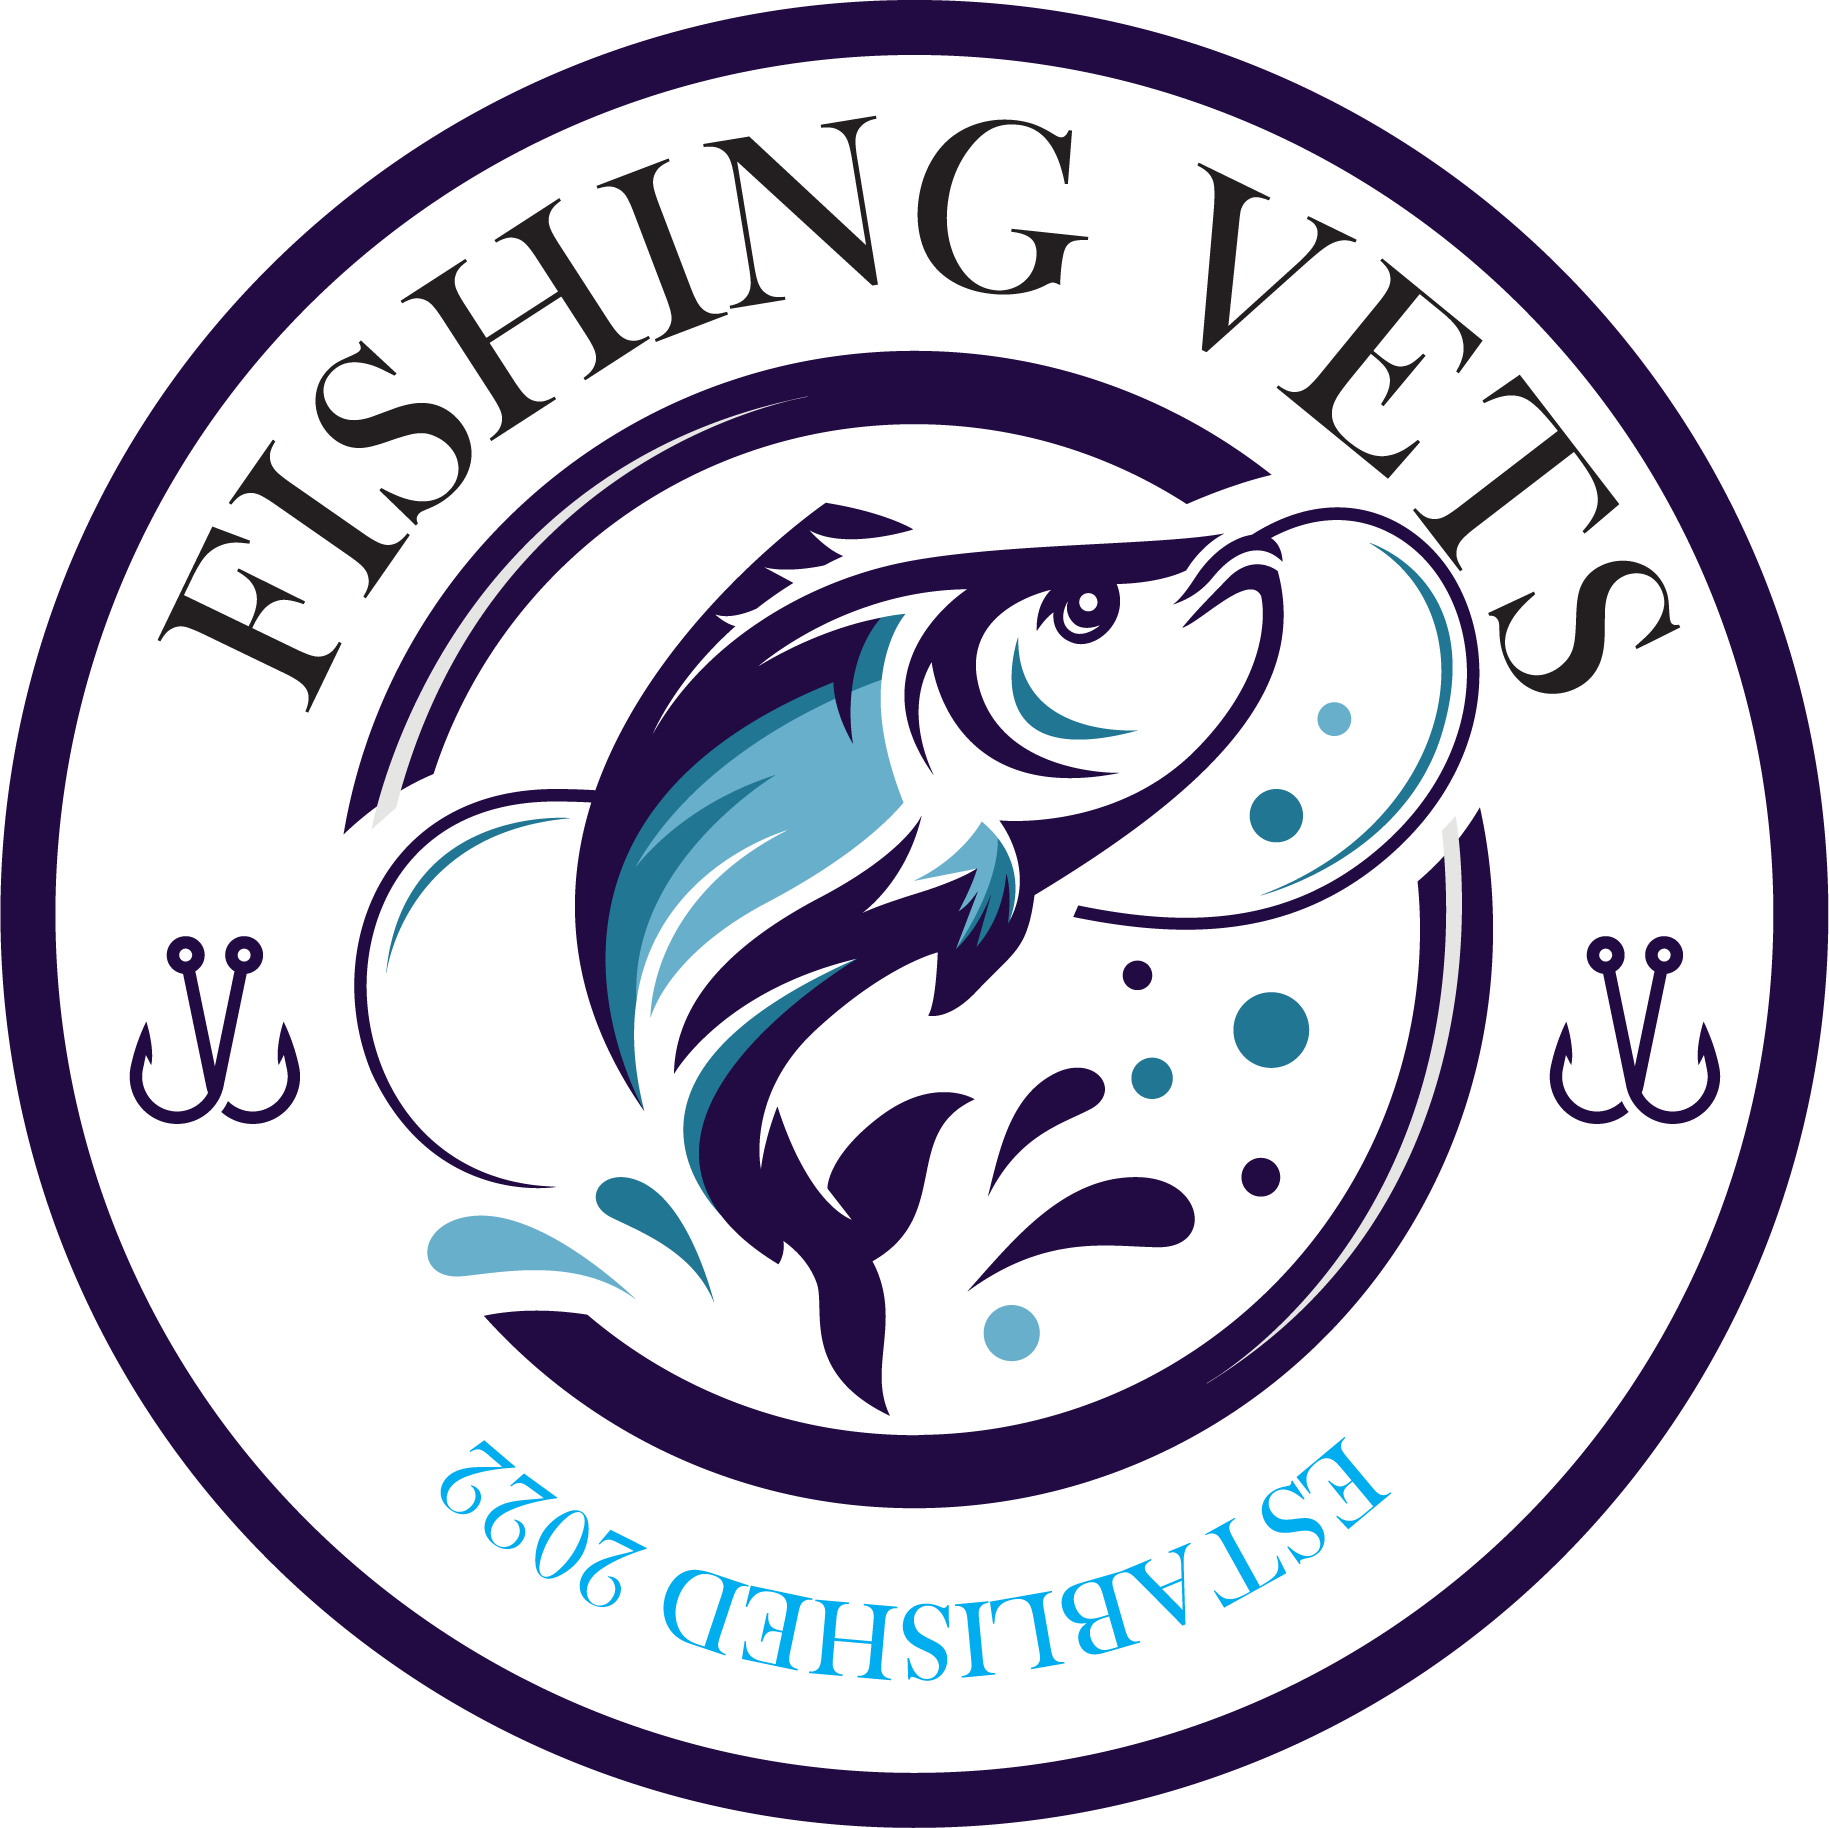 Welcome to Fishing Vets of SC